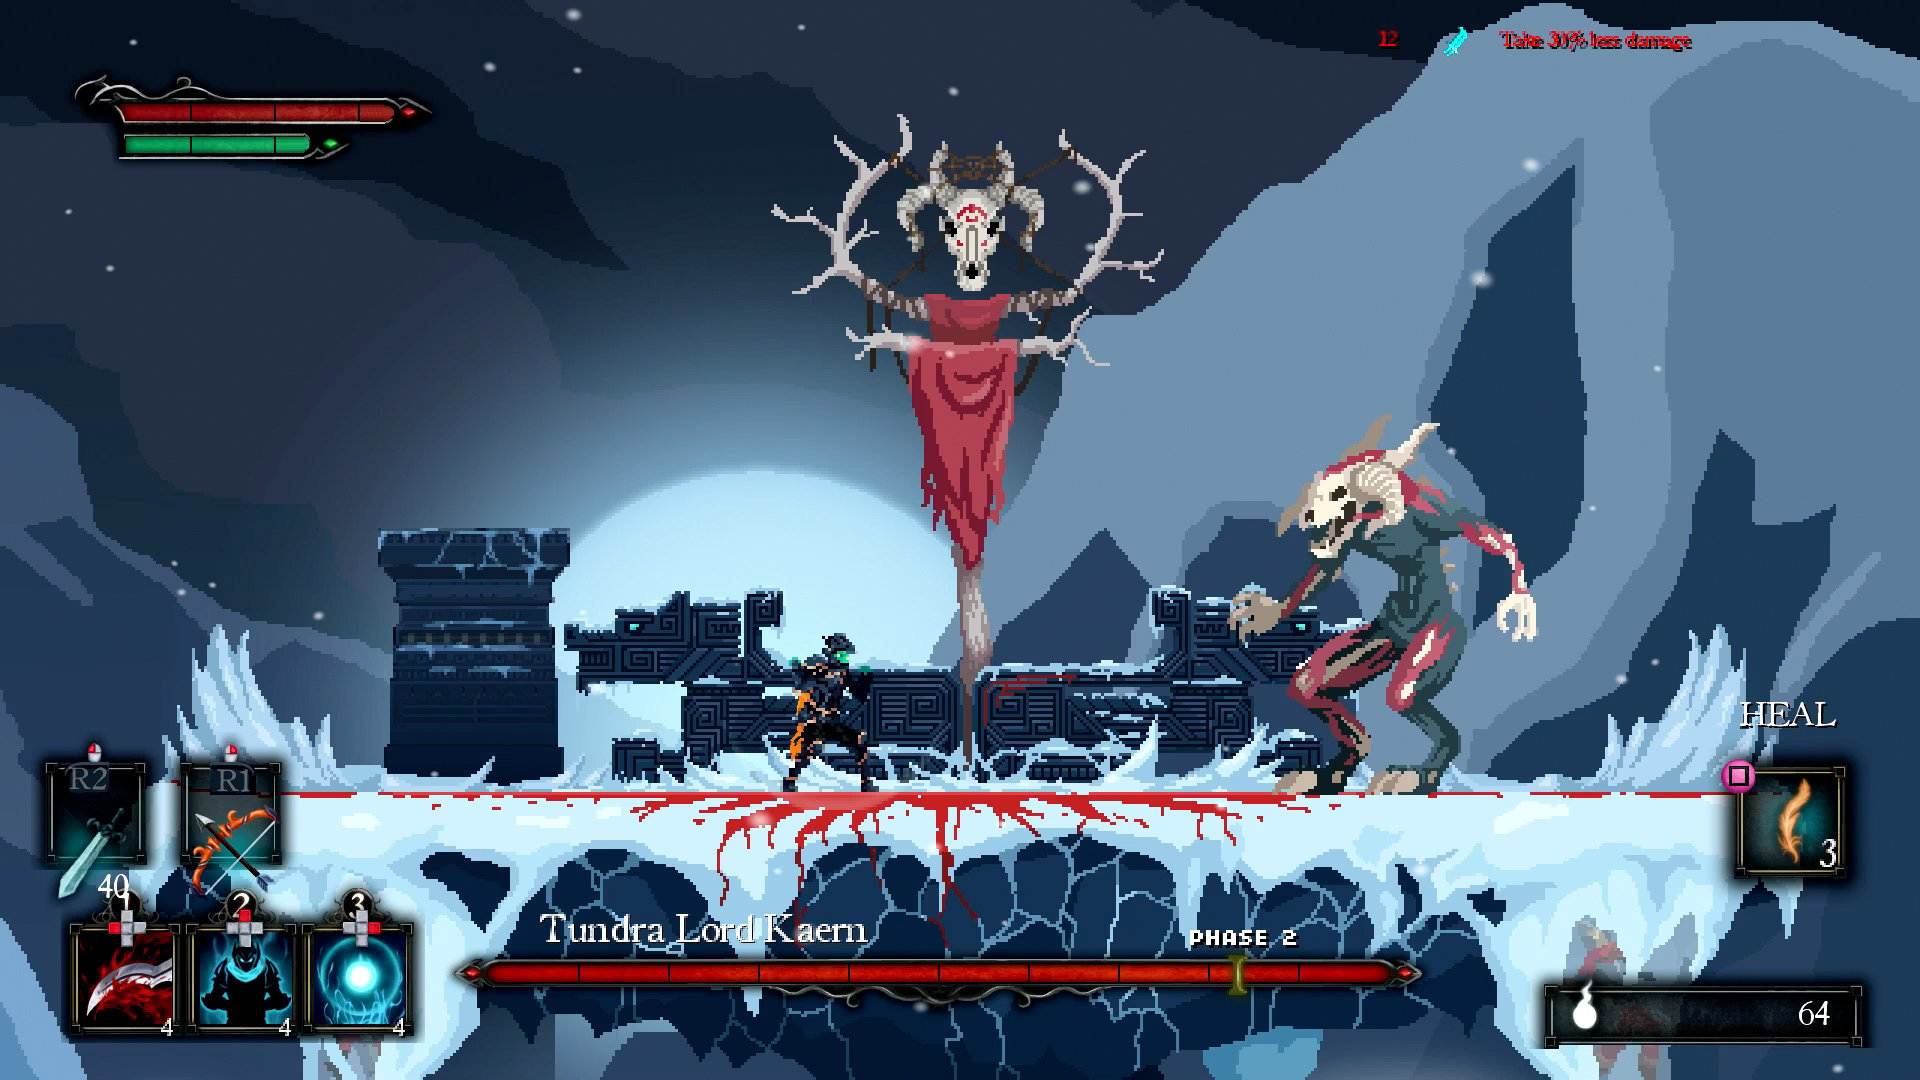 Reviews for Death's Gambit: Afterlife are looking good : r/metroidvania